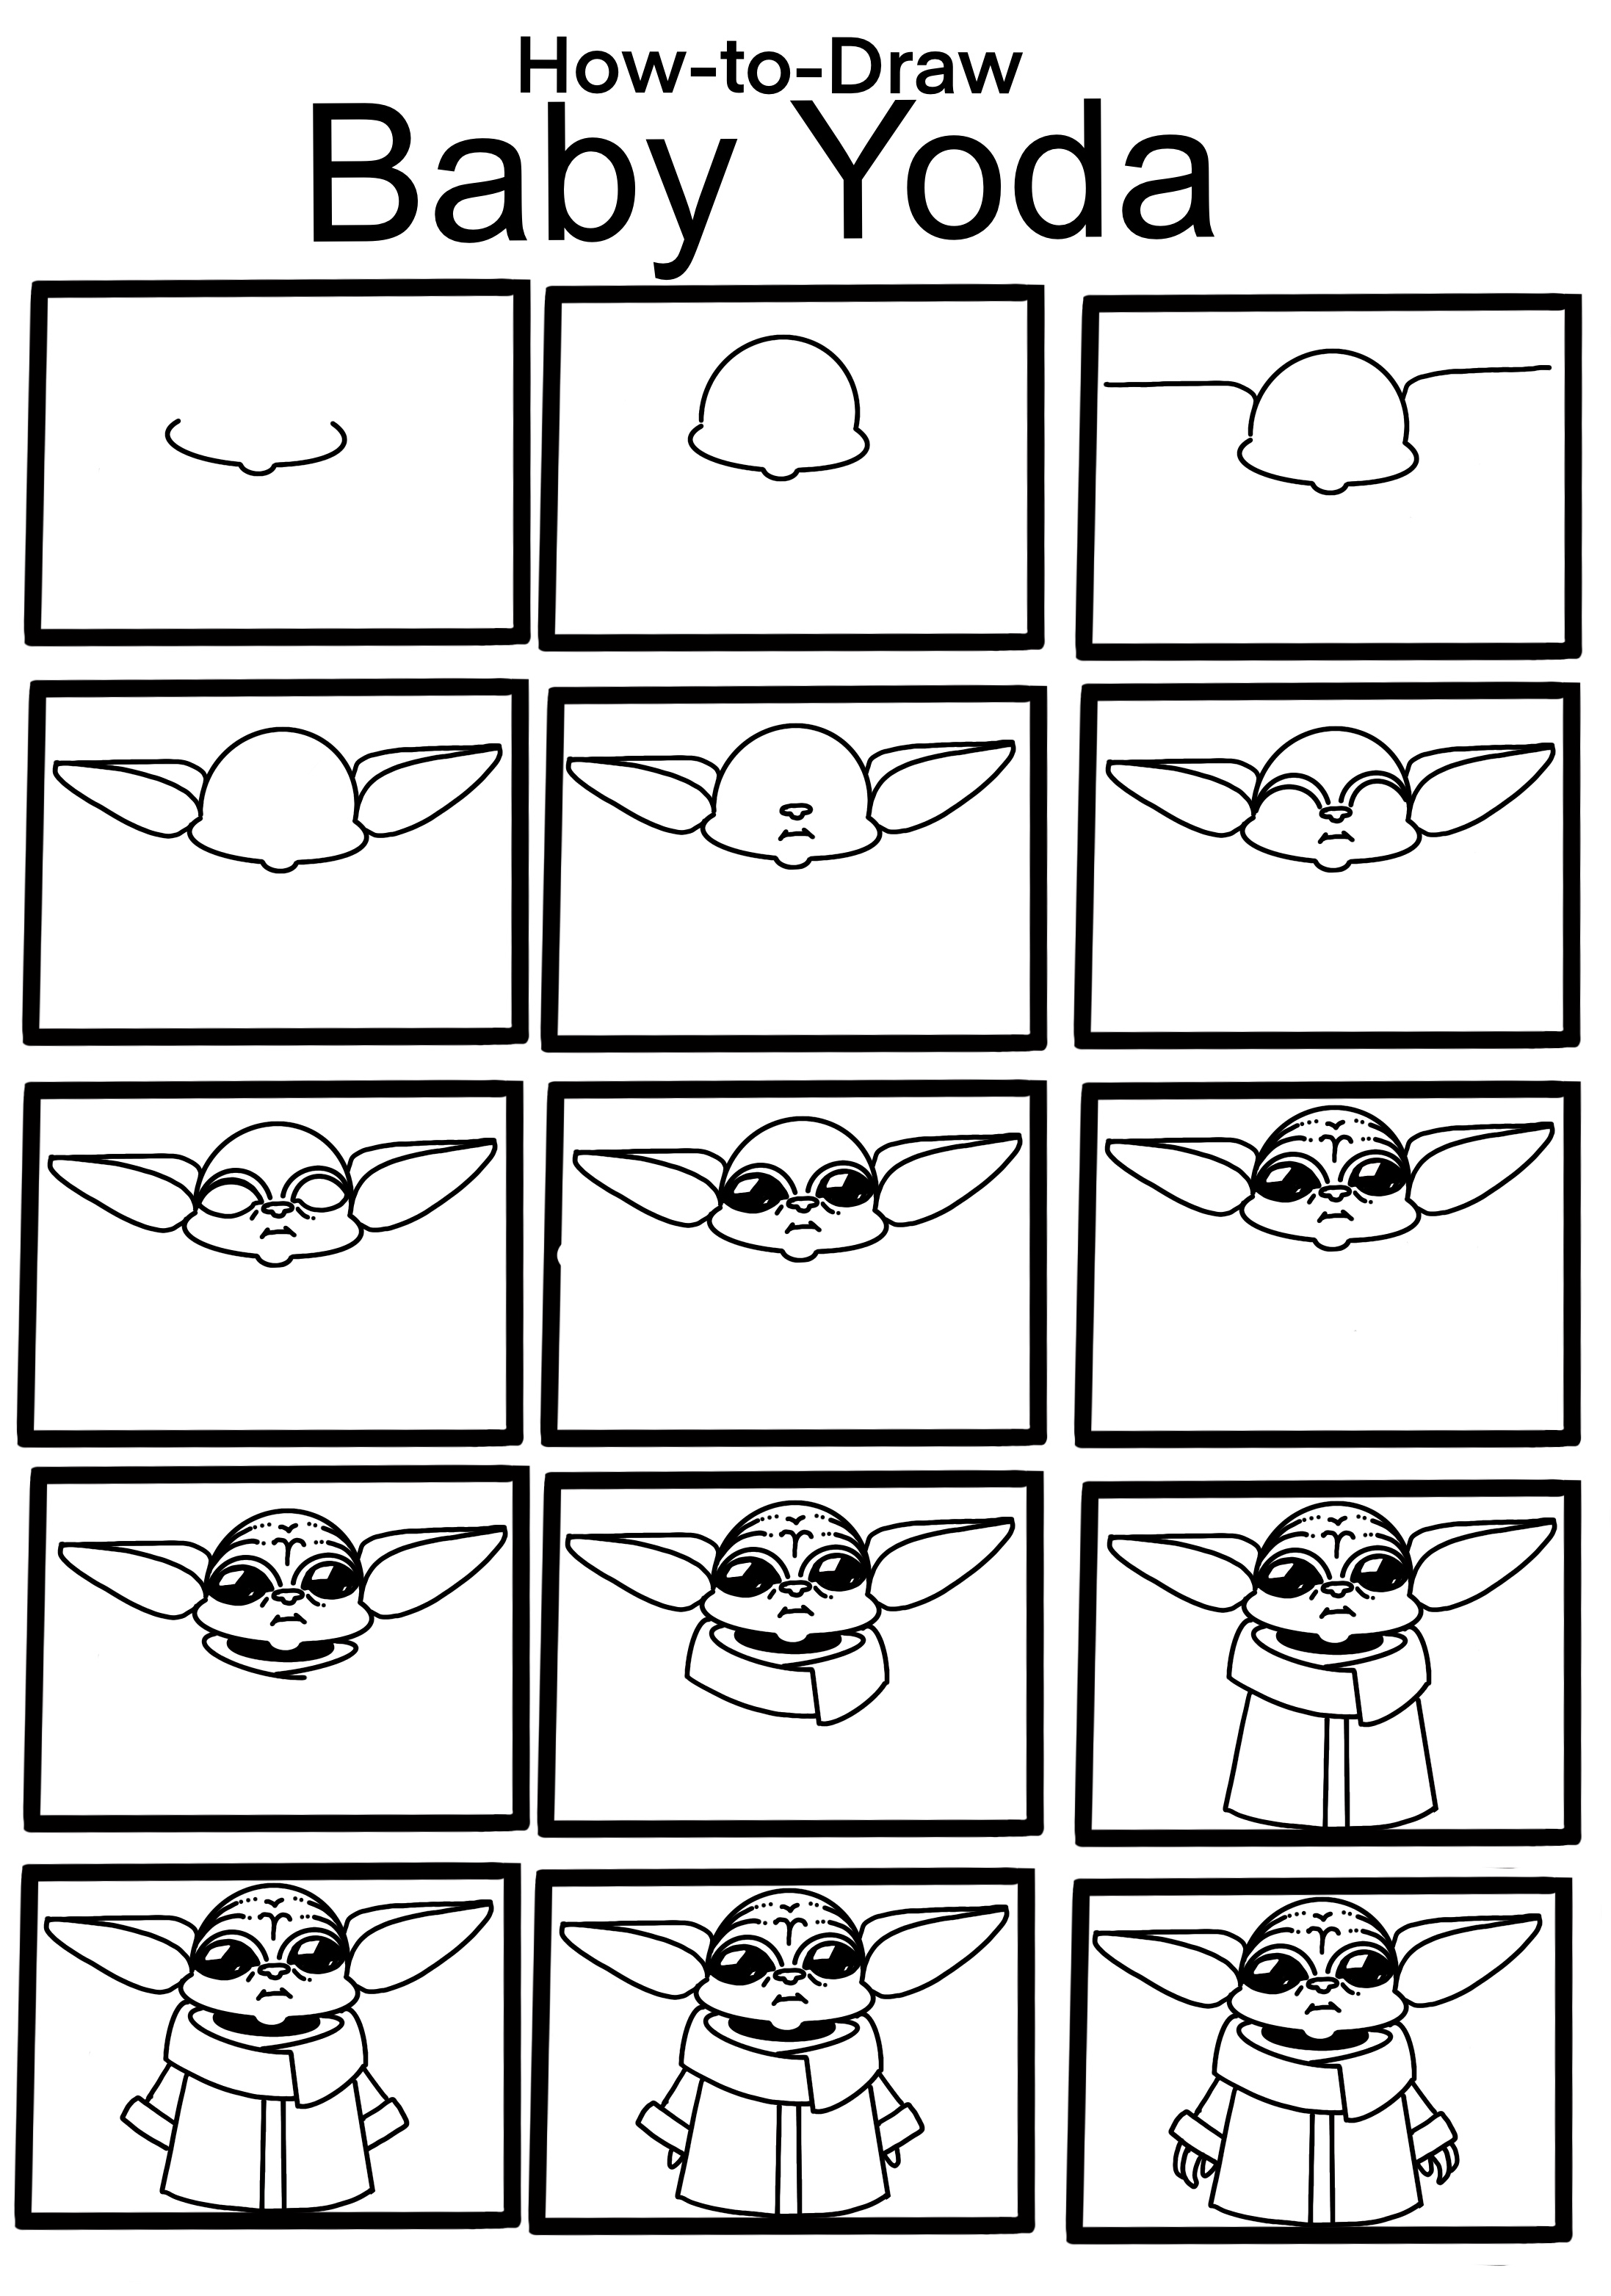 How to Draw Baby Yoda from the Mandalorian - Easy and Cute Drawing Tutorial